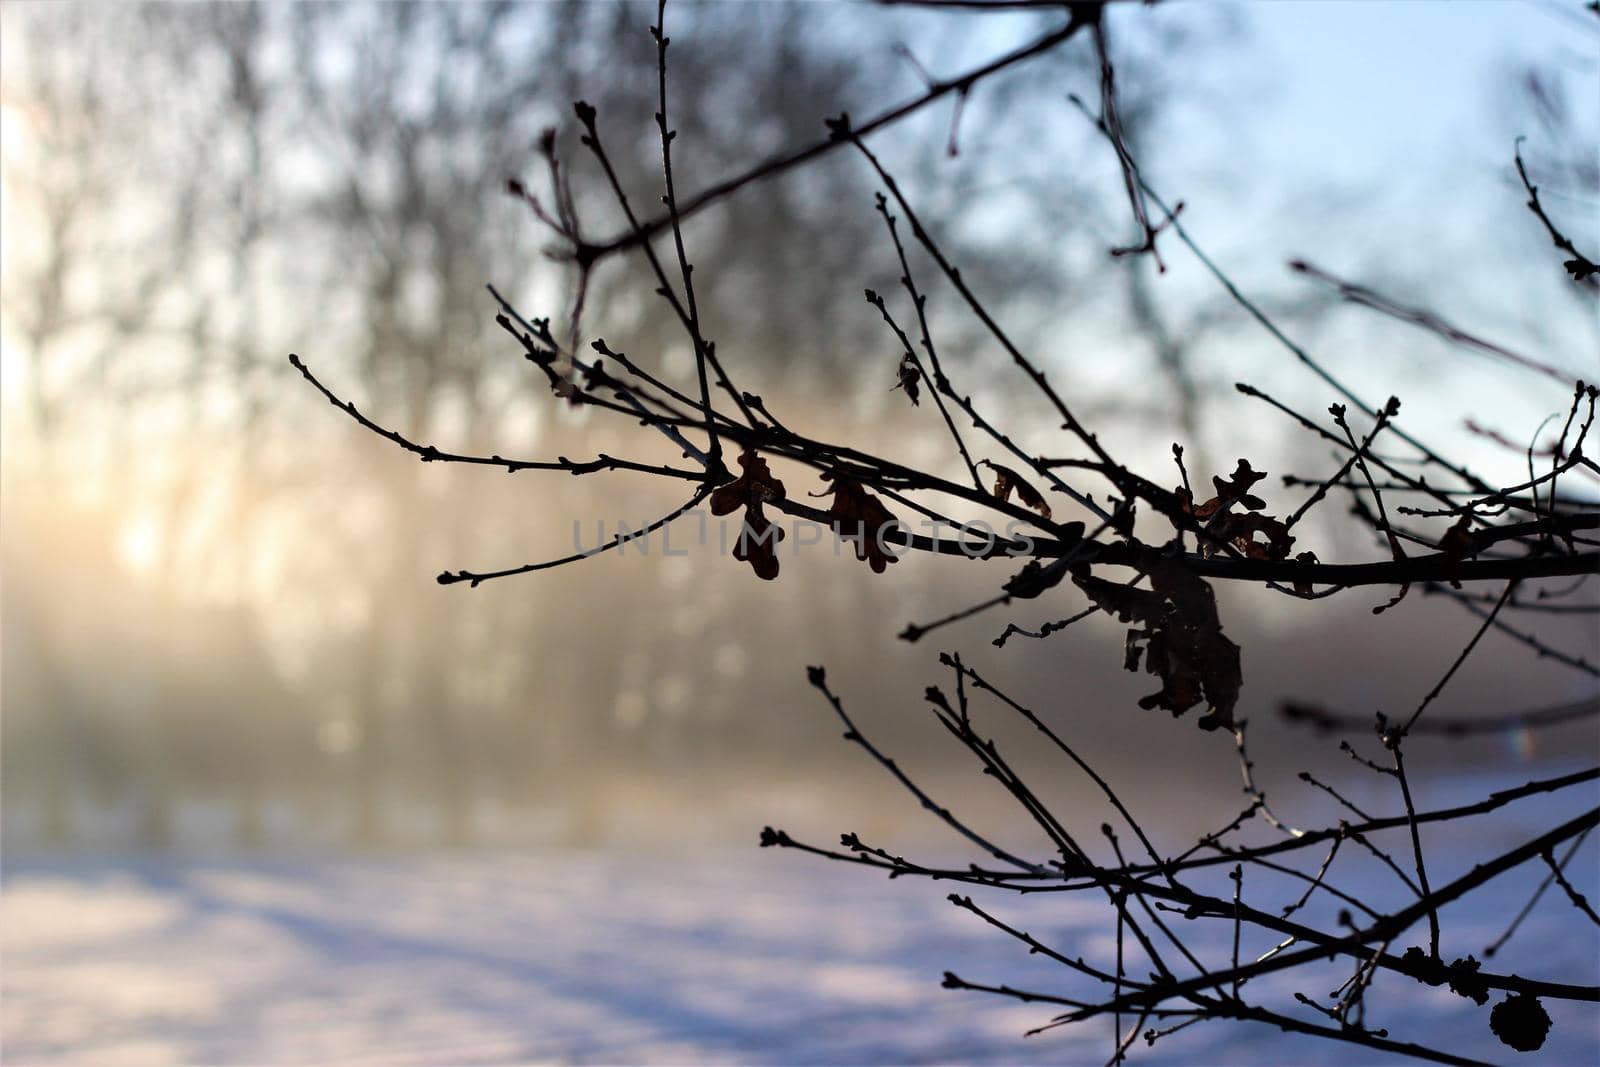 Close up of an oak branch with sunrise and snow in the background by Luise123